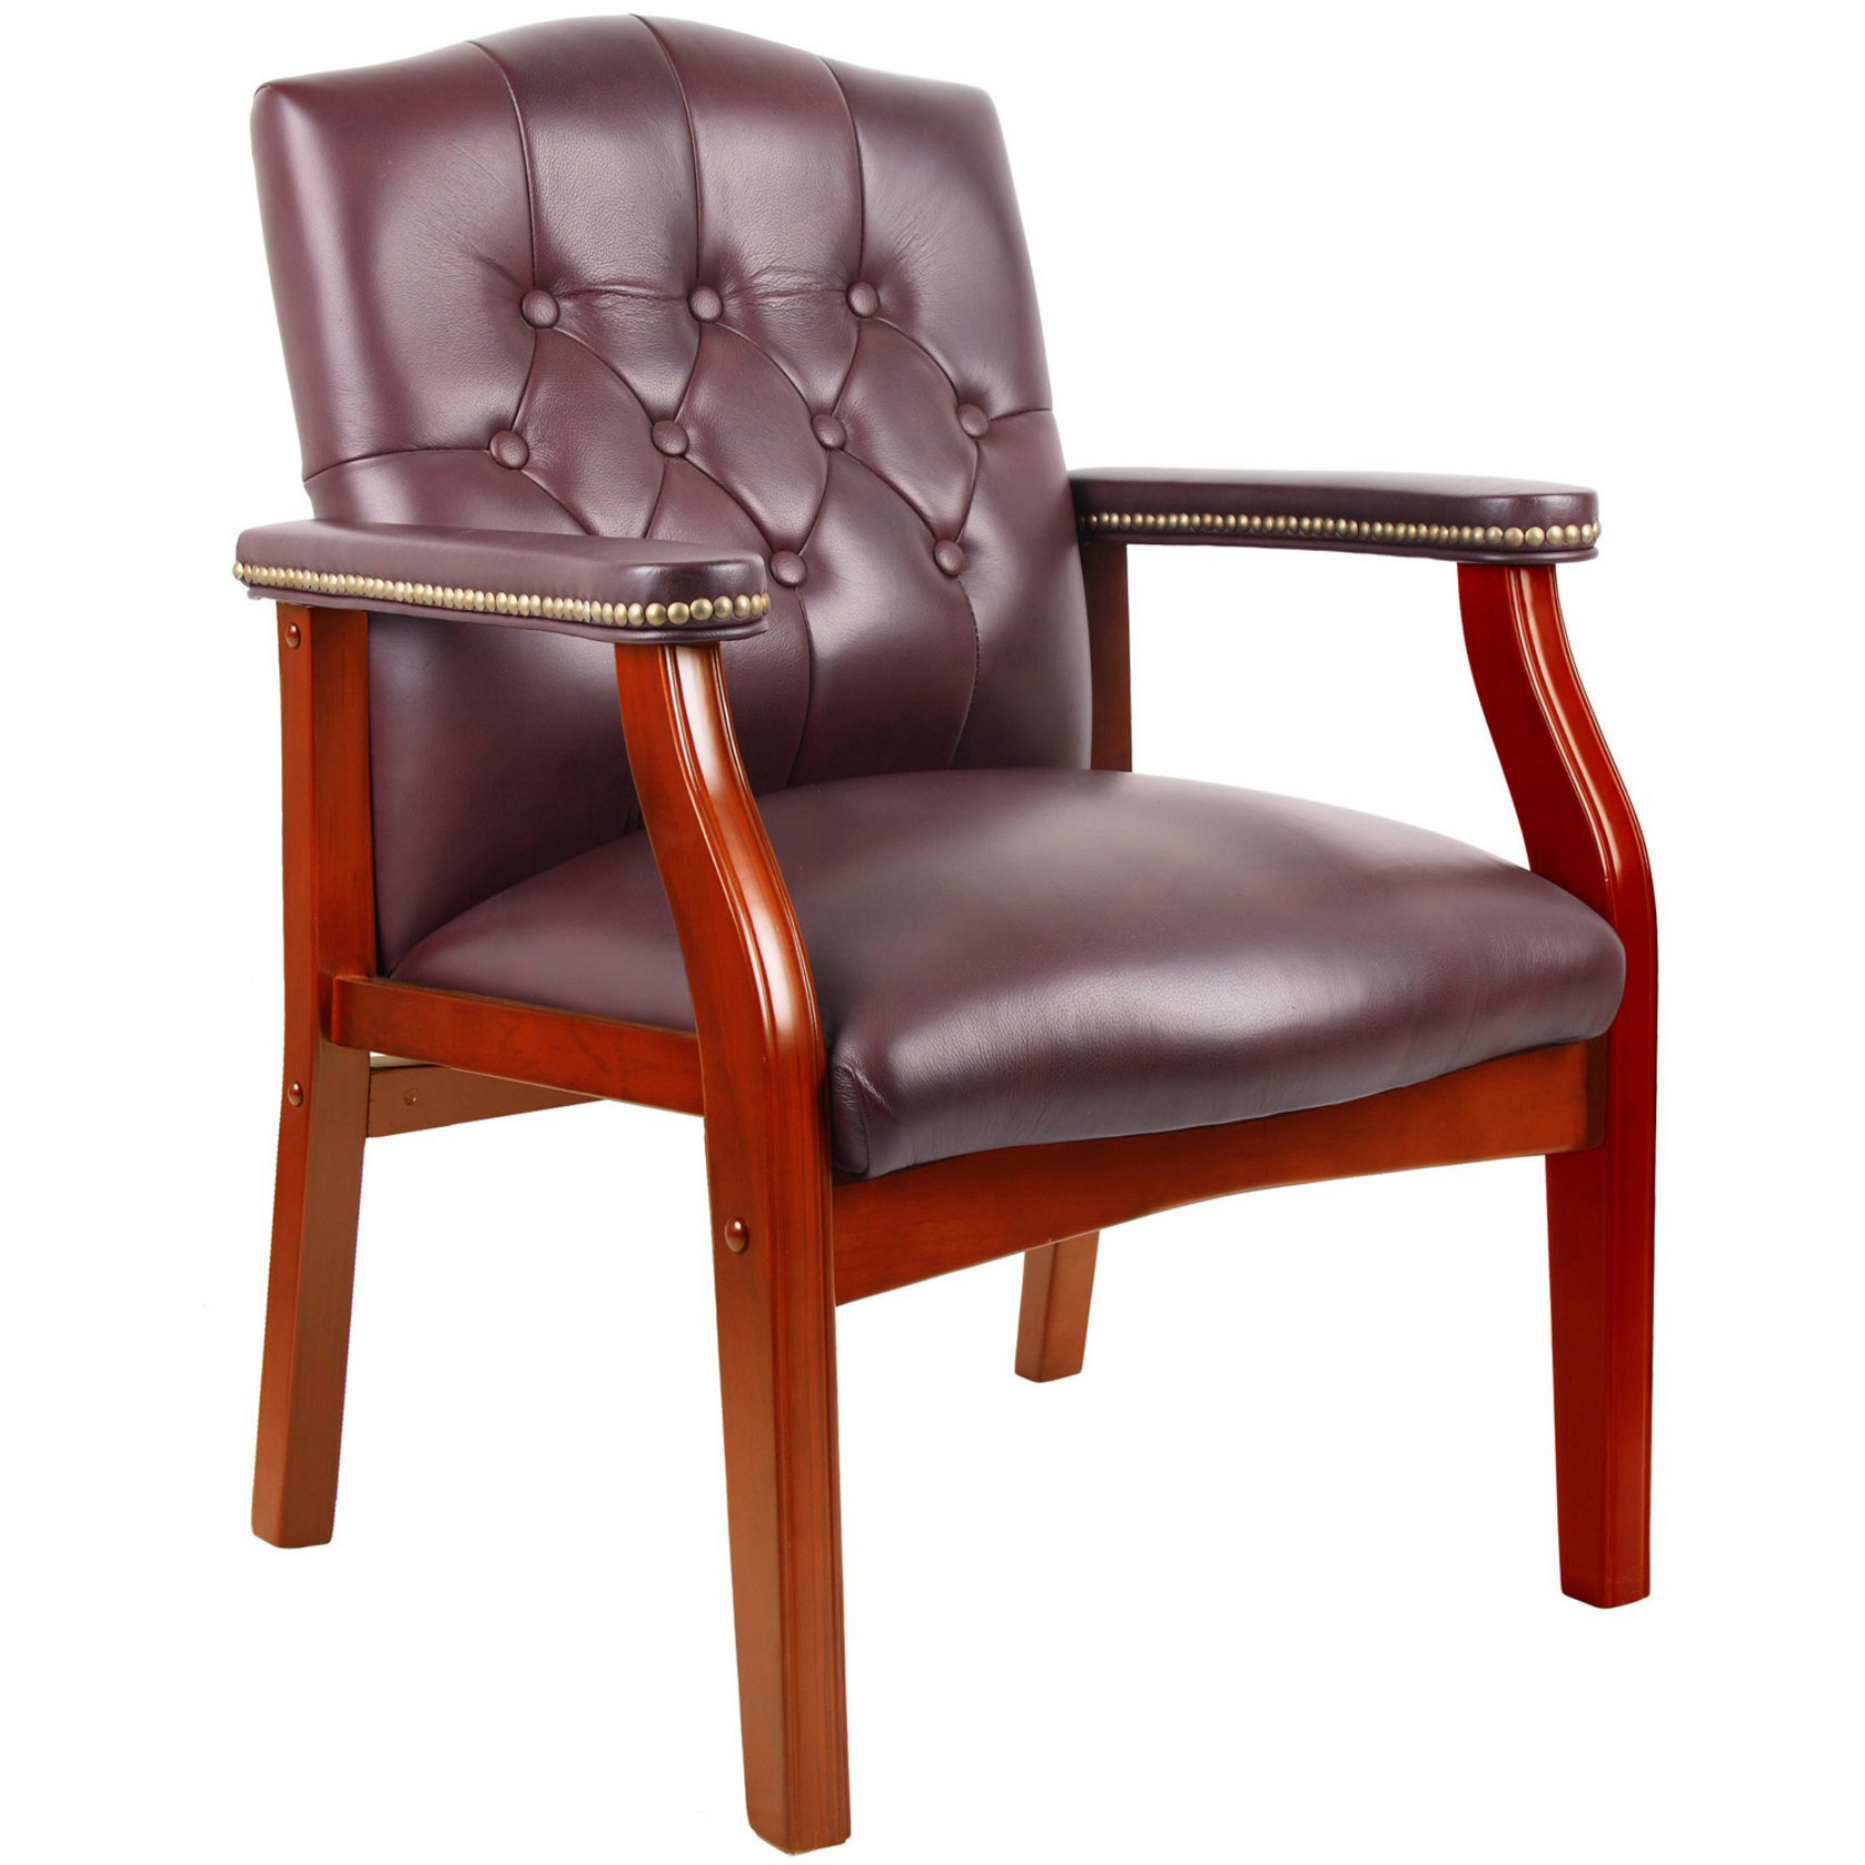 Office Chair In Burgundy Leather with Tufted Back in Cherry - image 1 of 3